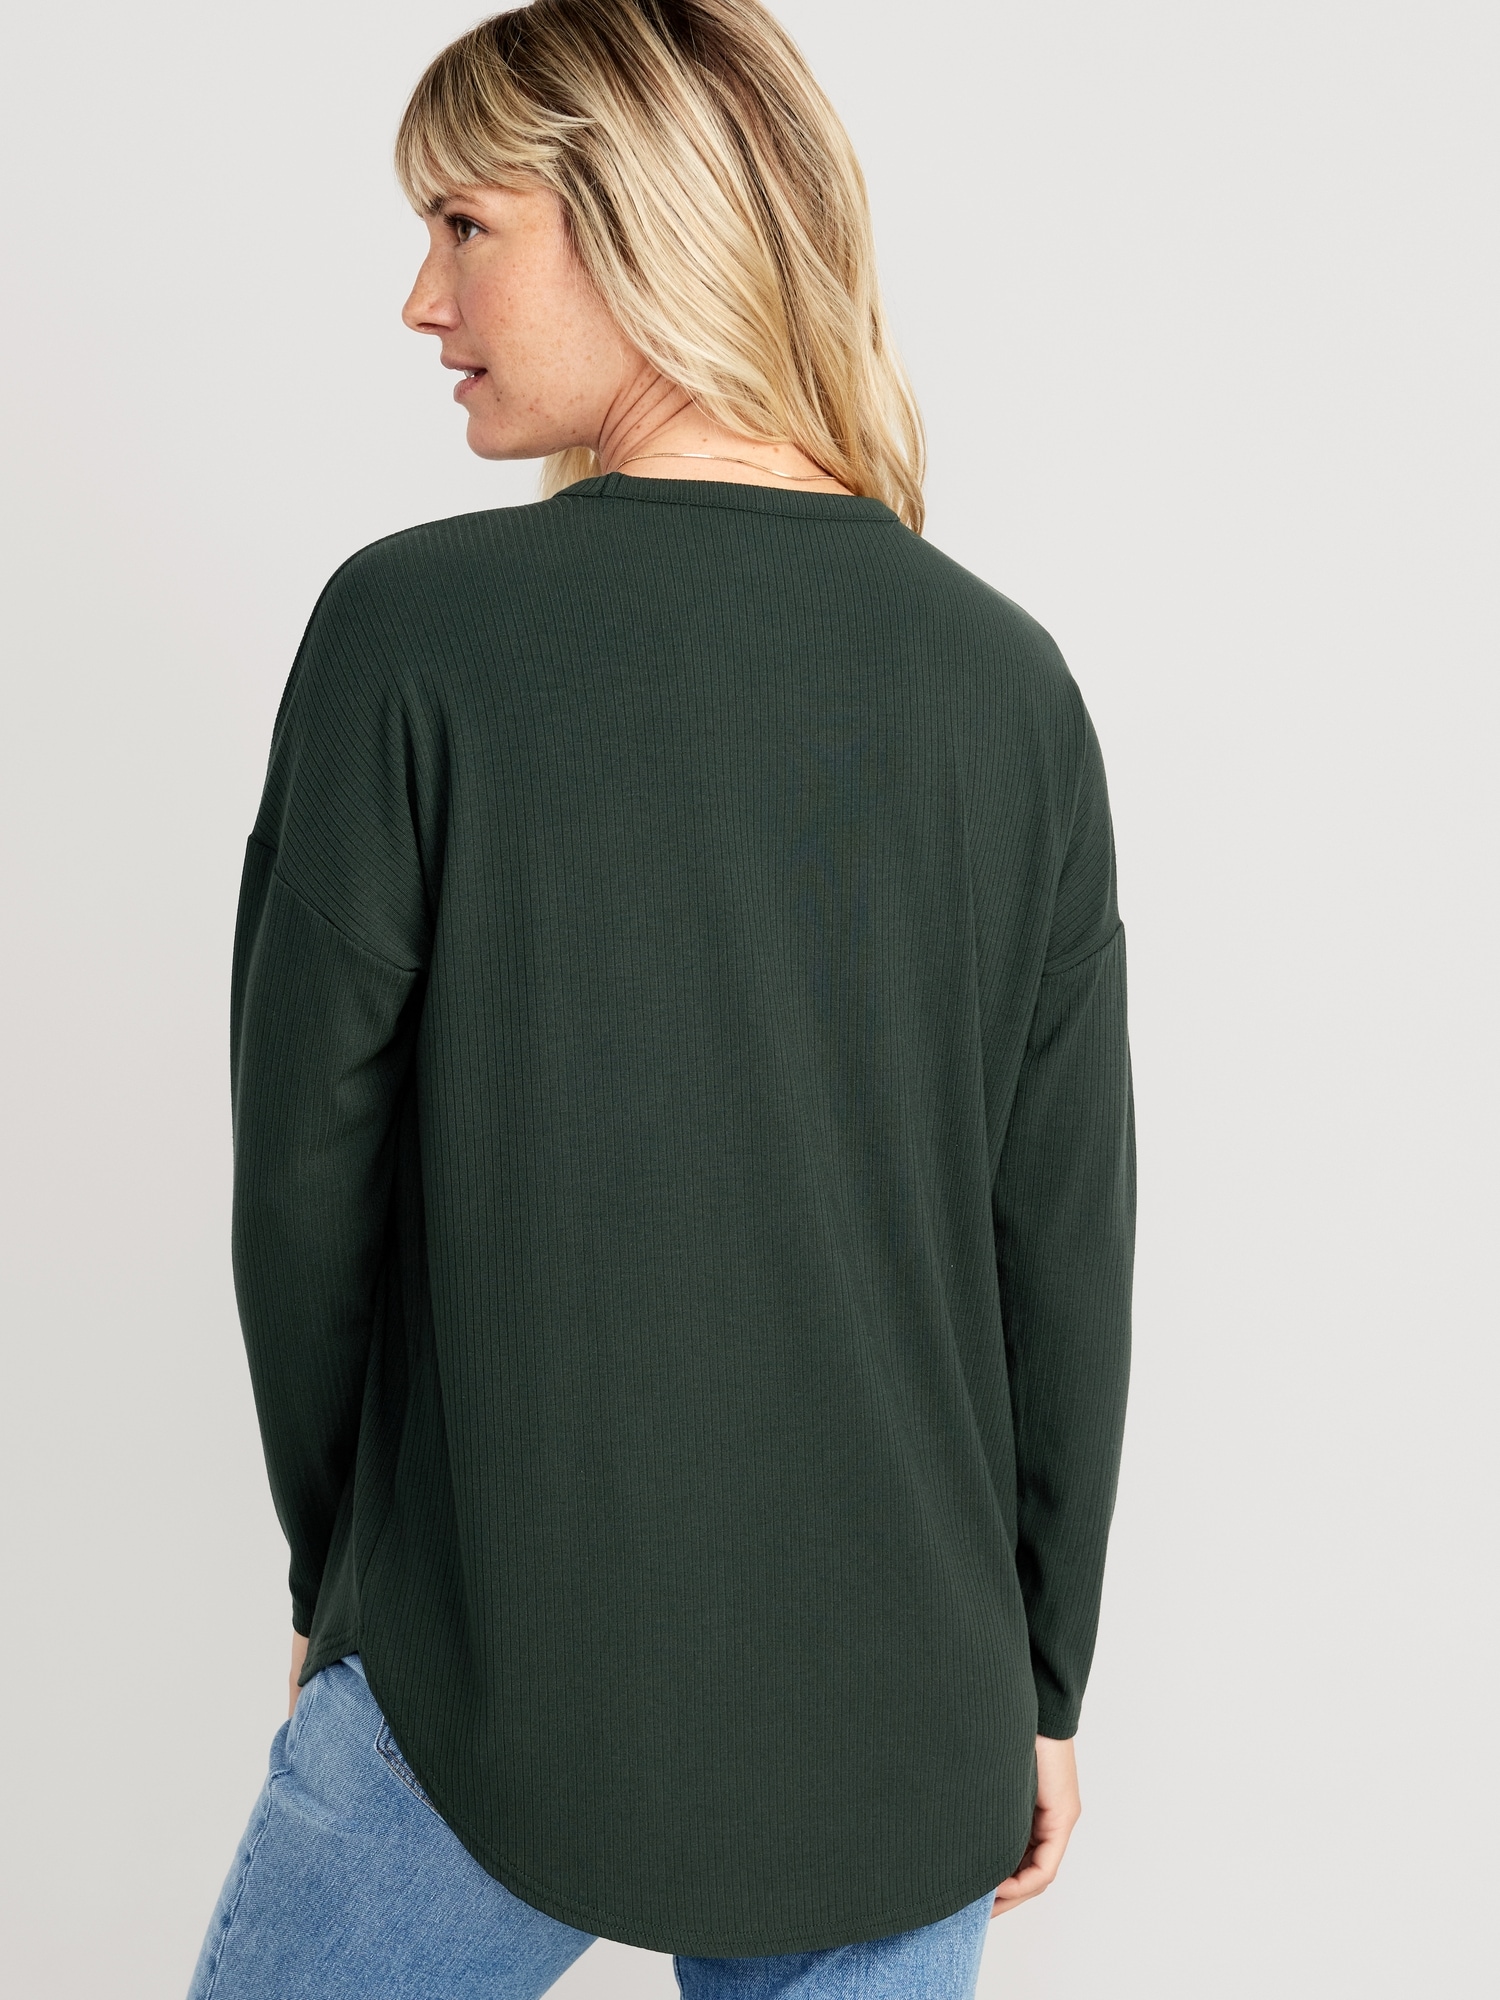 Luxe Rib-Knit Tunic T-Shirt for | Old Navy Women